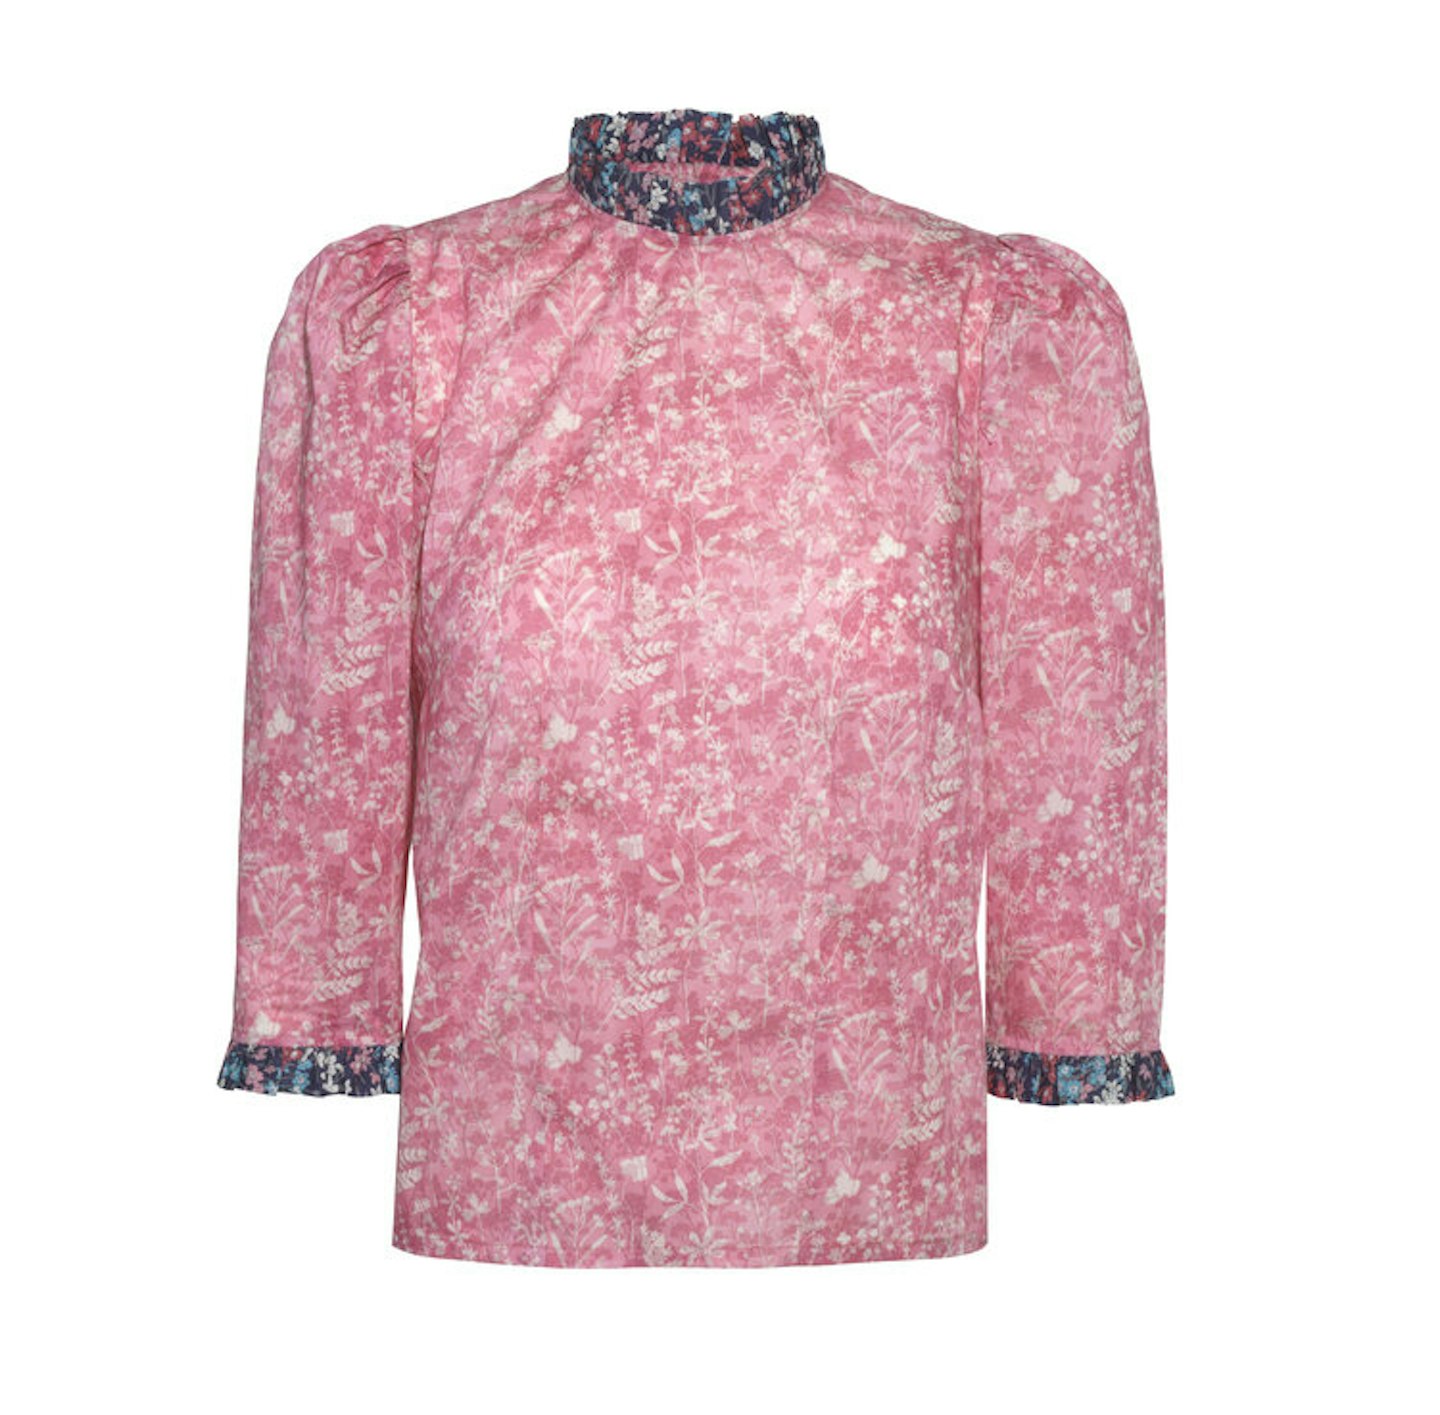 O Pioneers, Milly Blouse, £170